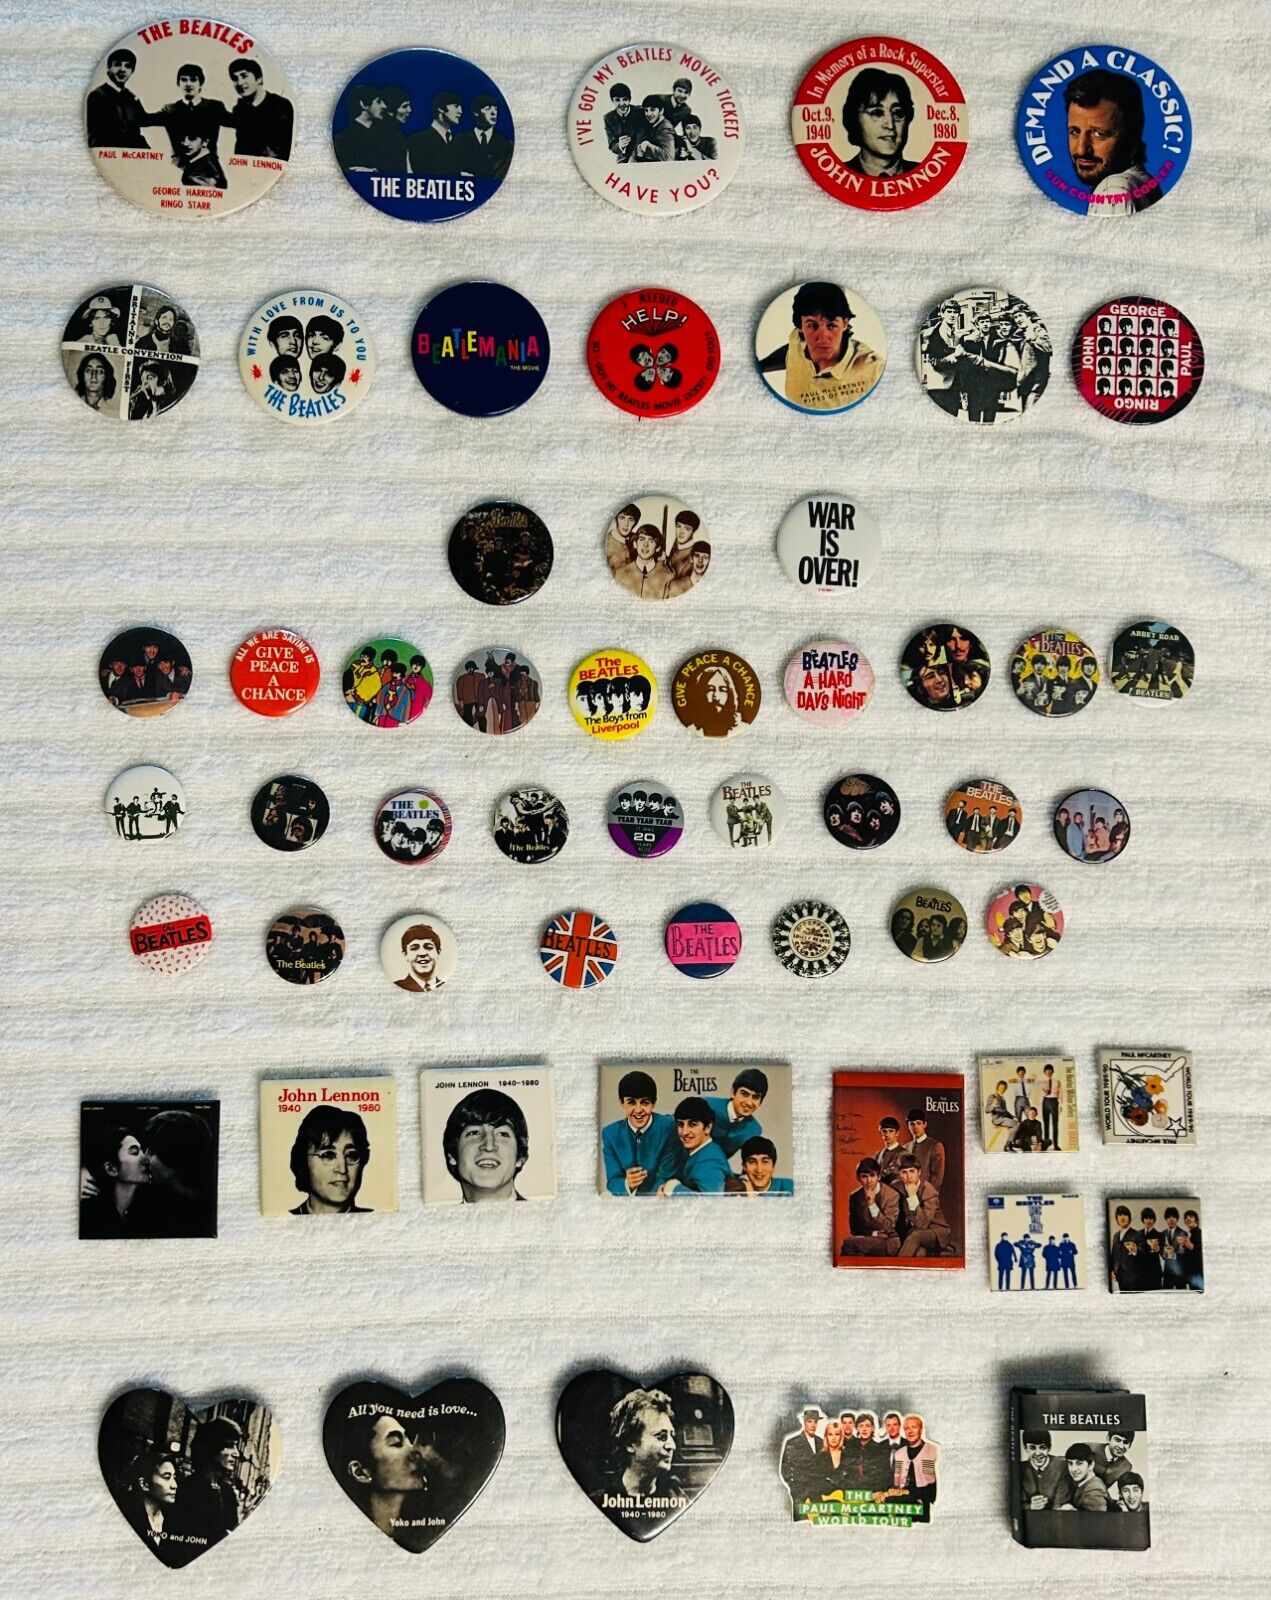 THE BEATLES Lot of 55 Buttons Pins Badges ALBUM COVERS, LENNON & 1 MINI BOOK